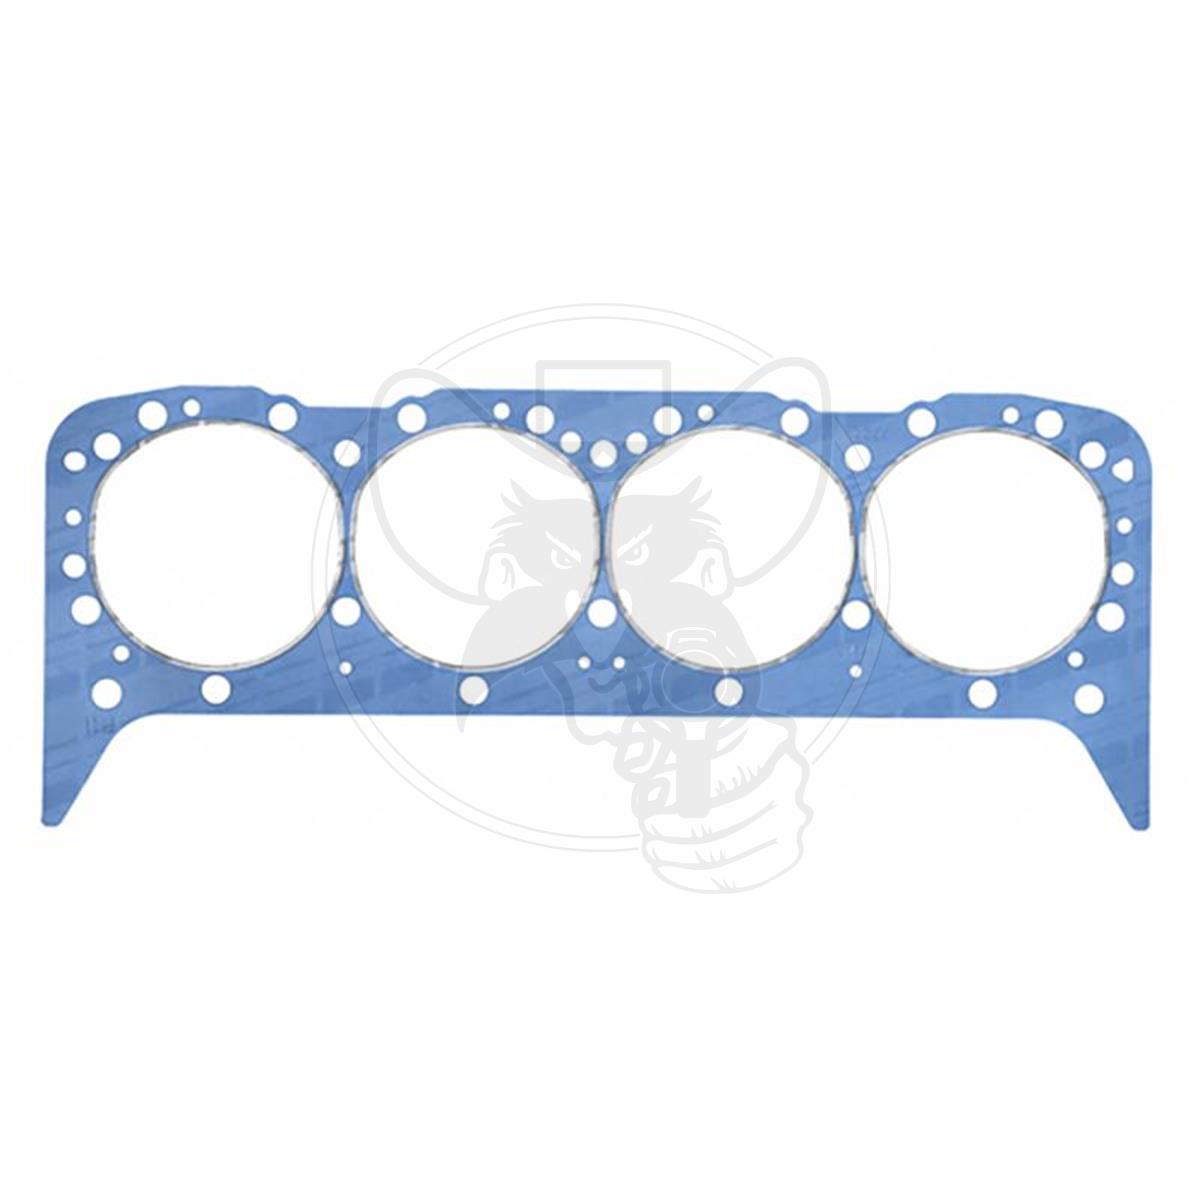 FELPRO CYLINDER HEAD GASKET FITS SMALL BLOCK CHEV 283-350 PTFE EACH